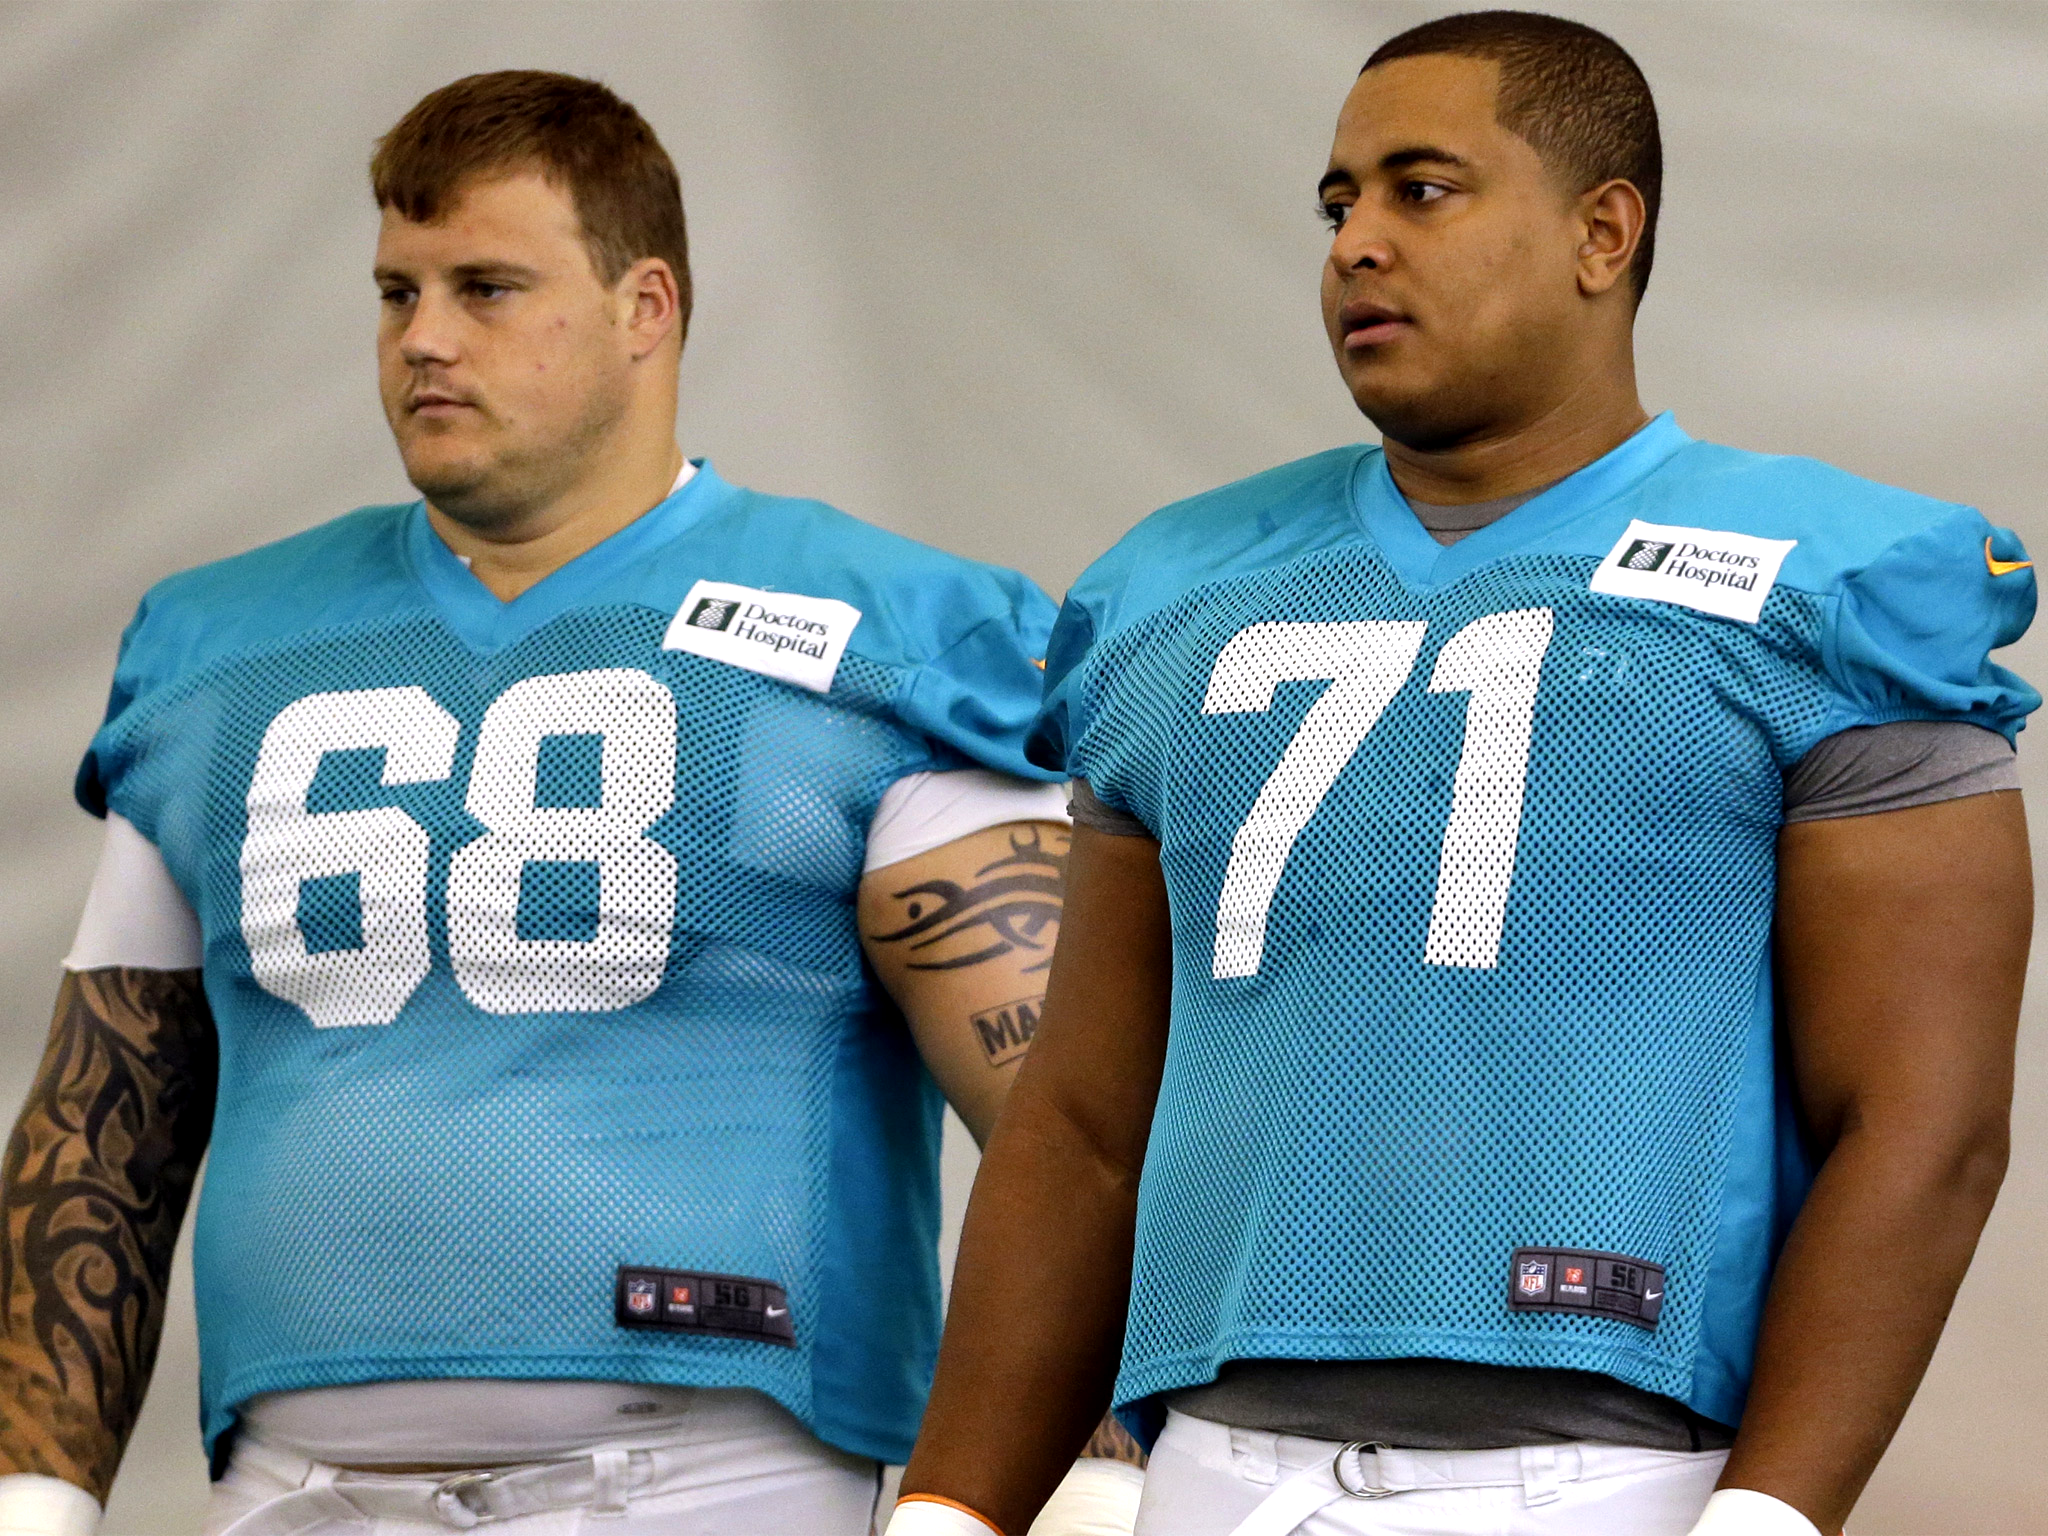 Richie Incognito (left) was taped threatening to kill Martin (right)